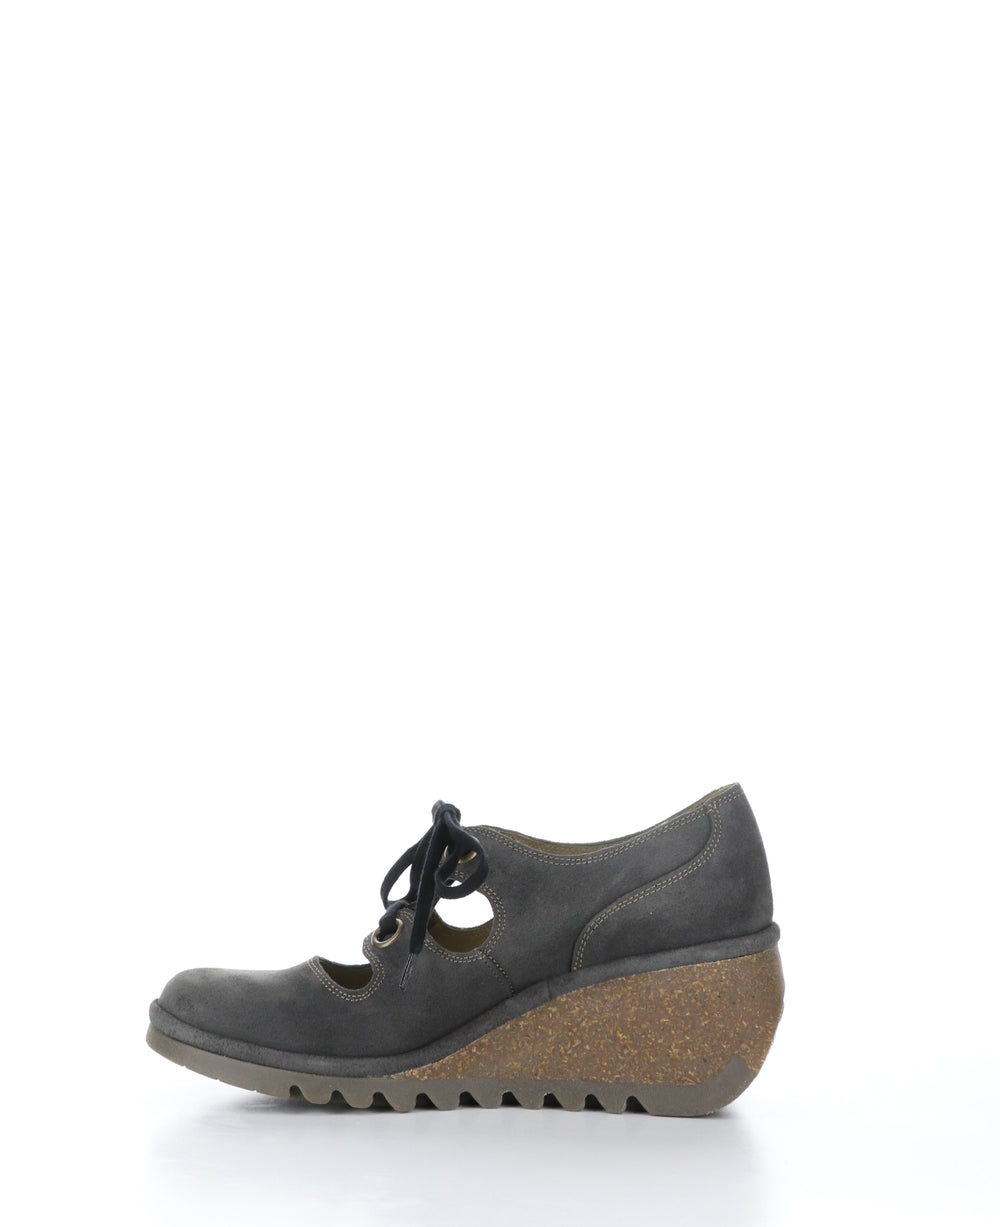 NELY337FLY Diesel Round Toe Shoes